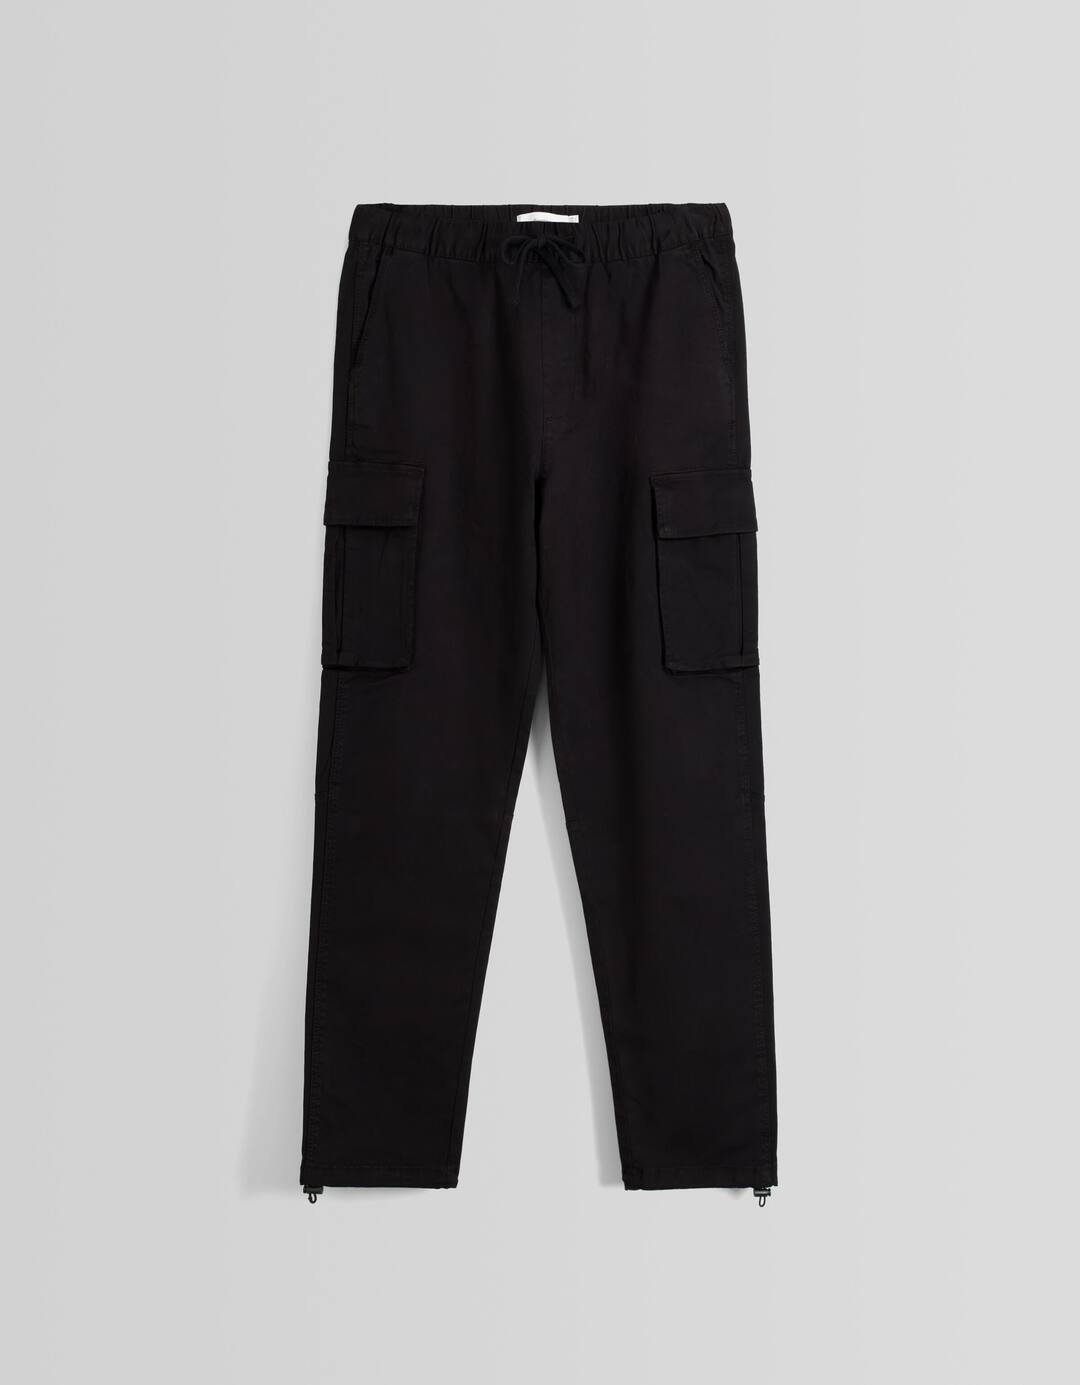 Cotton cargo trousers